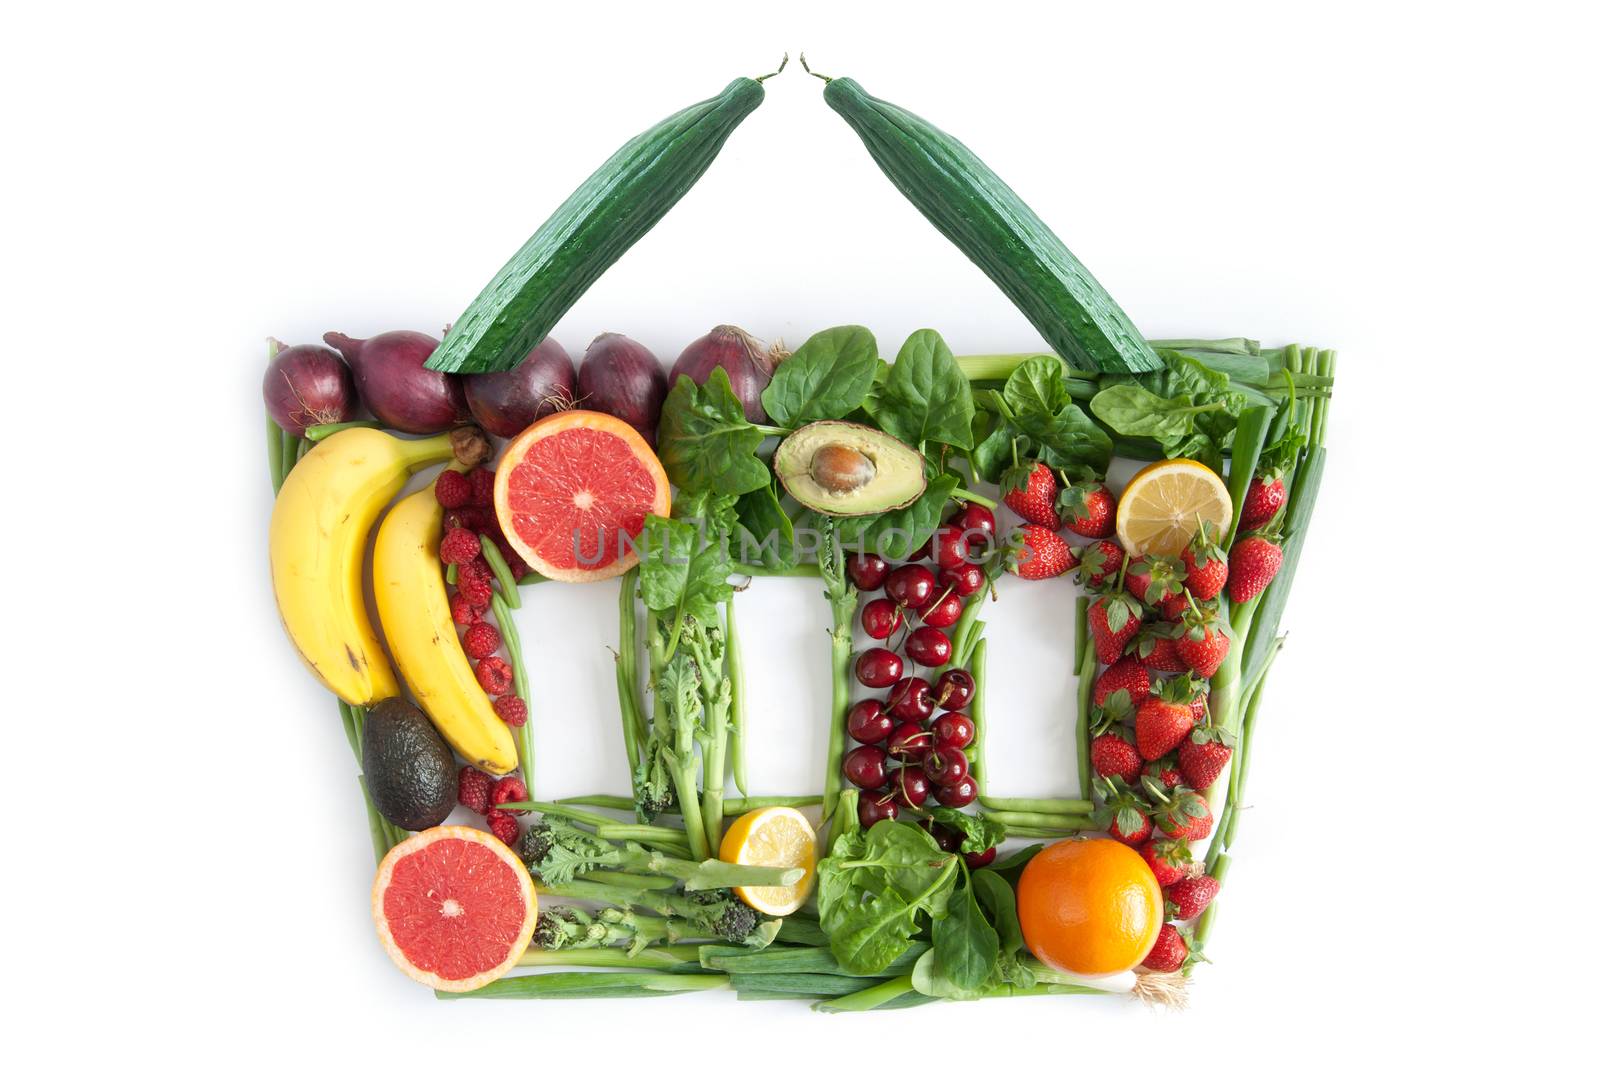 Fruits and vegetables in the shape of a grocery basket 